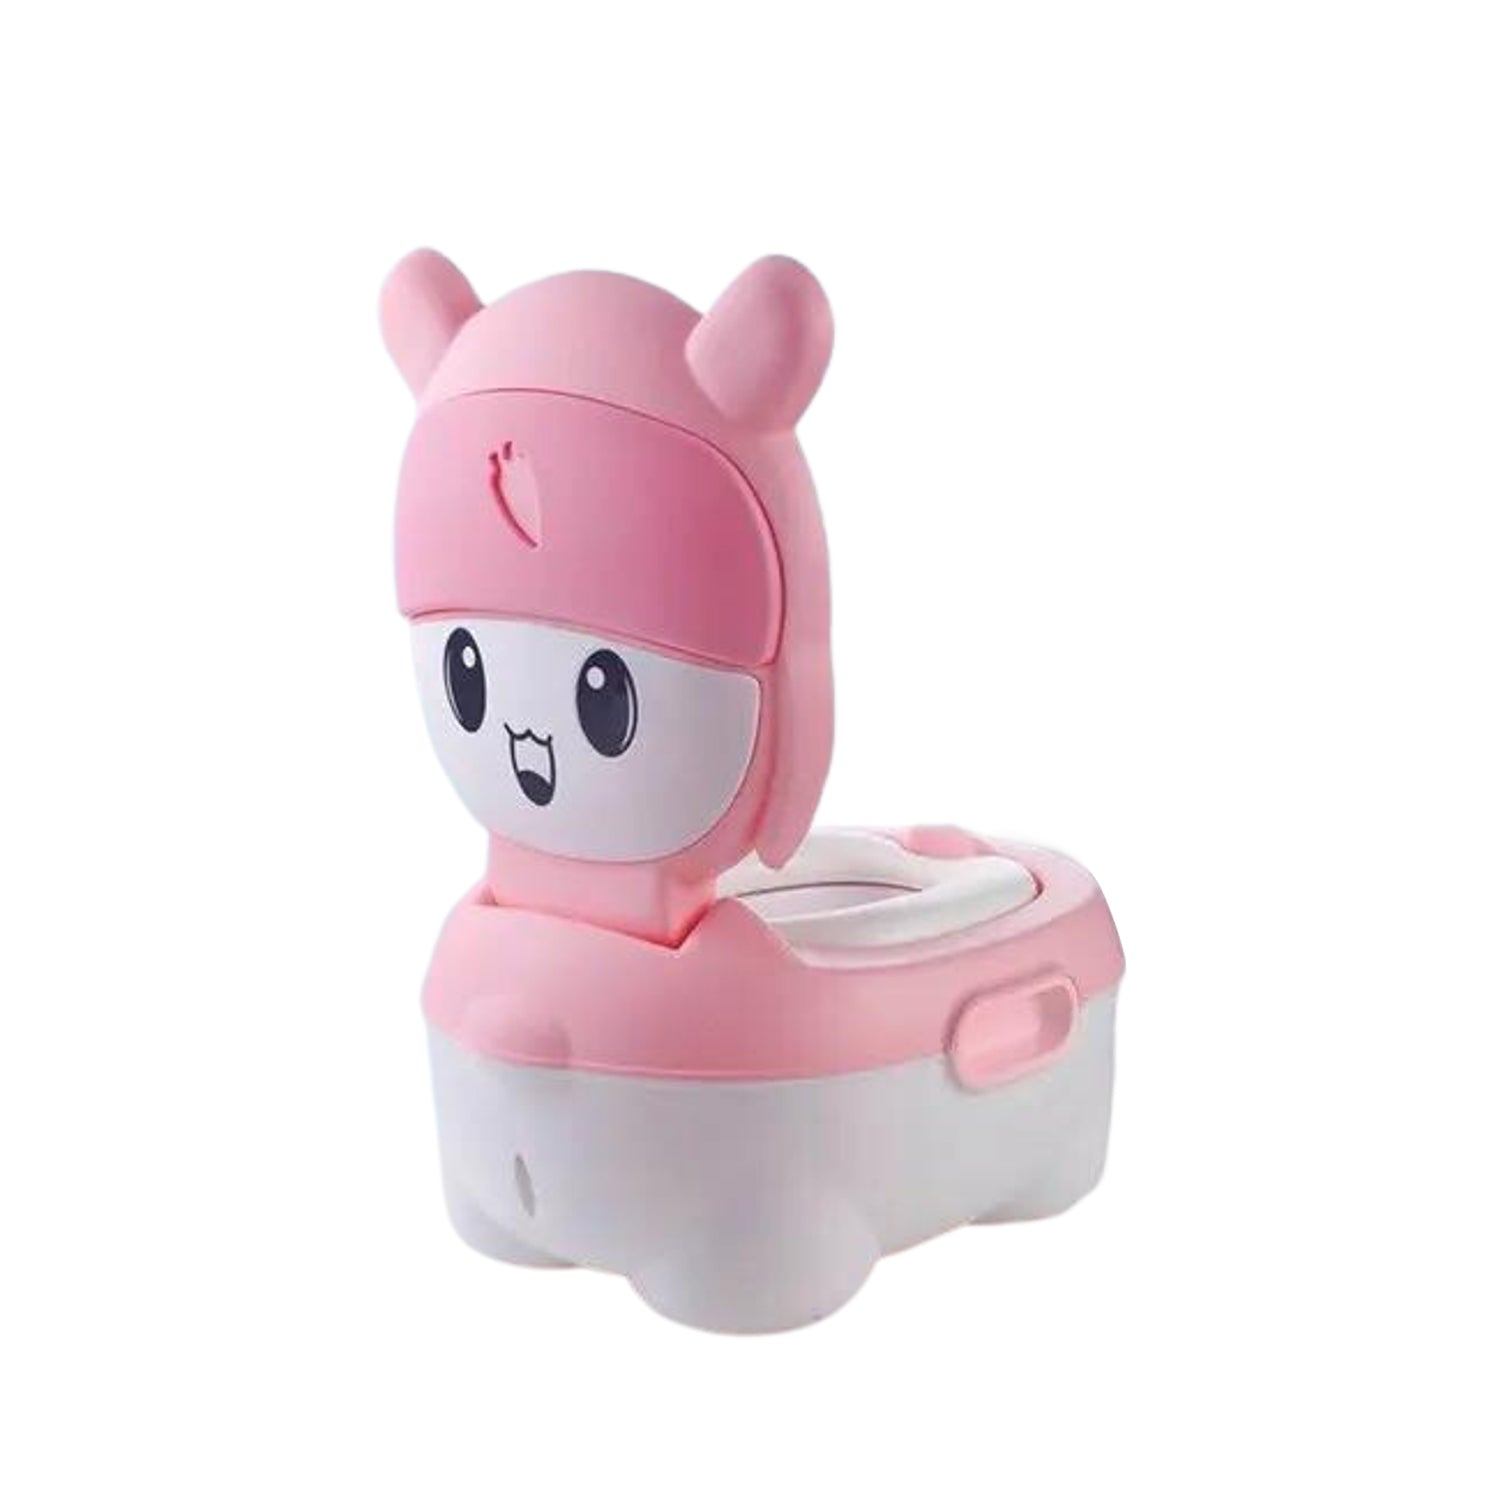 4577 Baby Potty Toilet Baby Potty Training Seat Baby Potty Chair for Toddler Boys Girls Potty Seat for 1+ year child